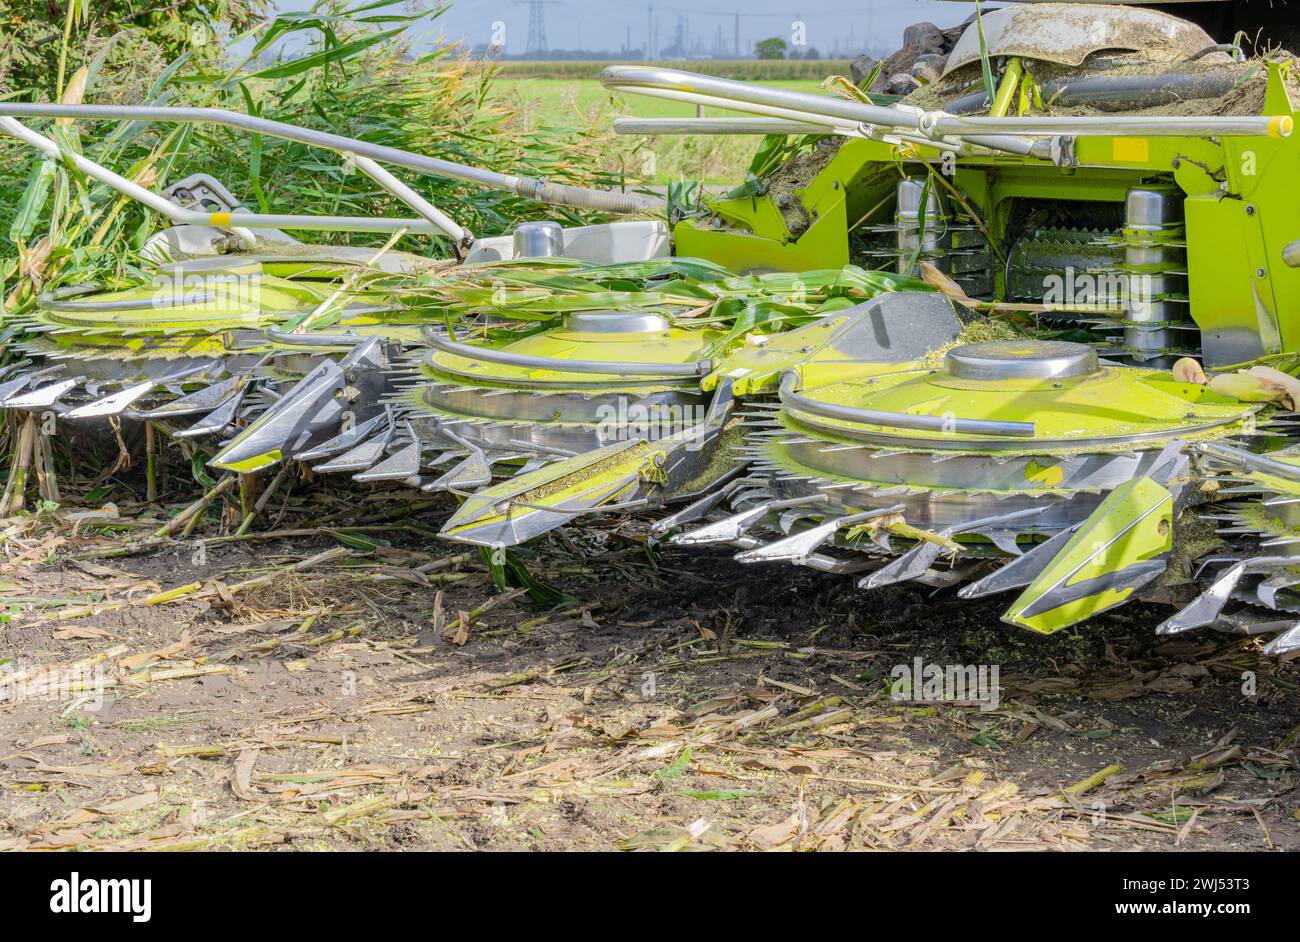 Maize header or mower attachment from a maize chopper Stock Photo